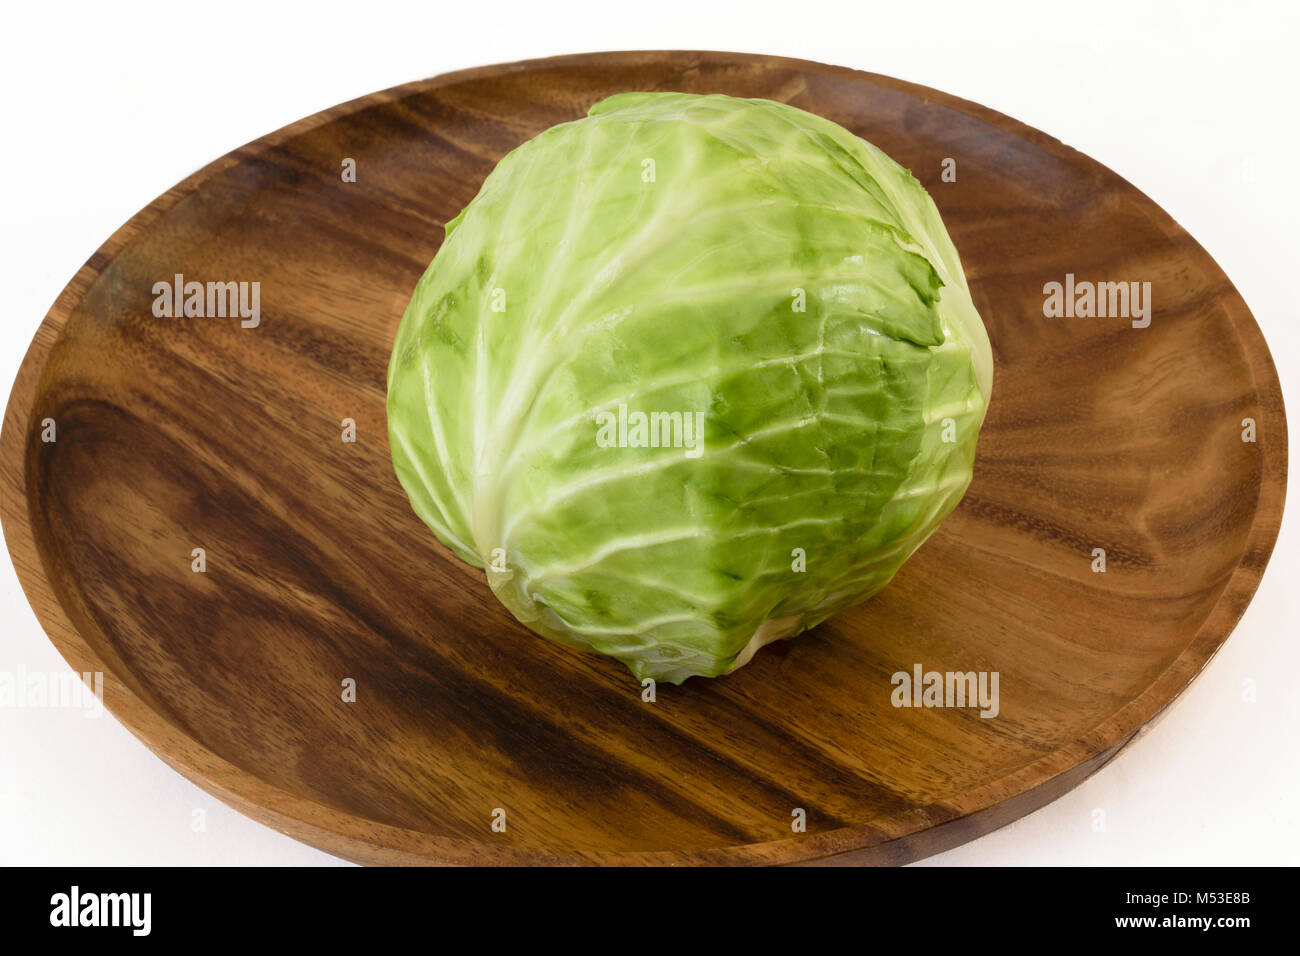 Sigle raw cabbageon a wooden dish Stock Photo